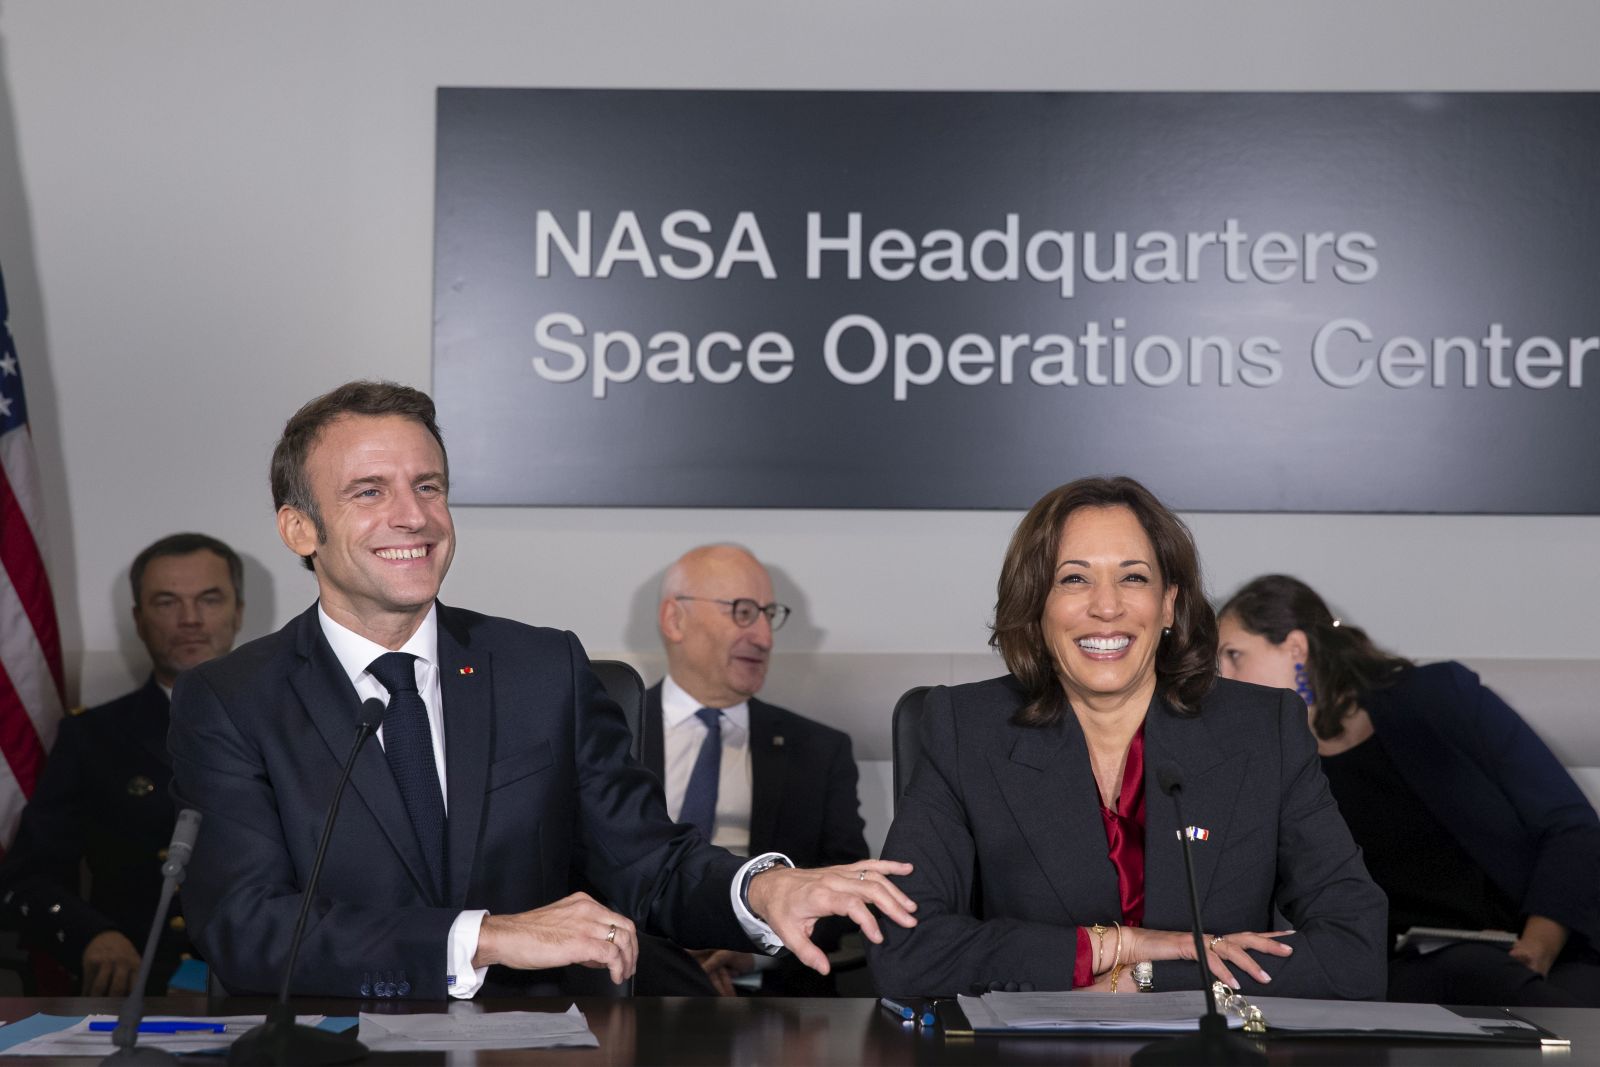 epa10339278 France's President Emmanuel Macron (L) meets with US Vice President Kamala Harris (R) at the National Aeronautics and Space Administration (NASA) headquarters, to highlight space cooperation between France and the US, in Washington, DC, USA, 30 November 2022. Macron is in Washington for the first state visit of the Biden presidency.  EPA/MICHAEL REYNOLDS